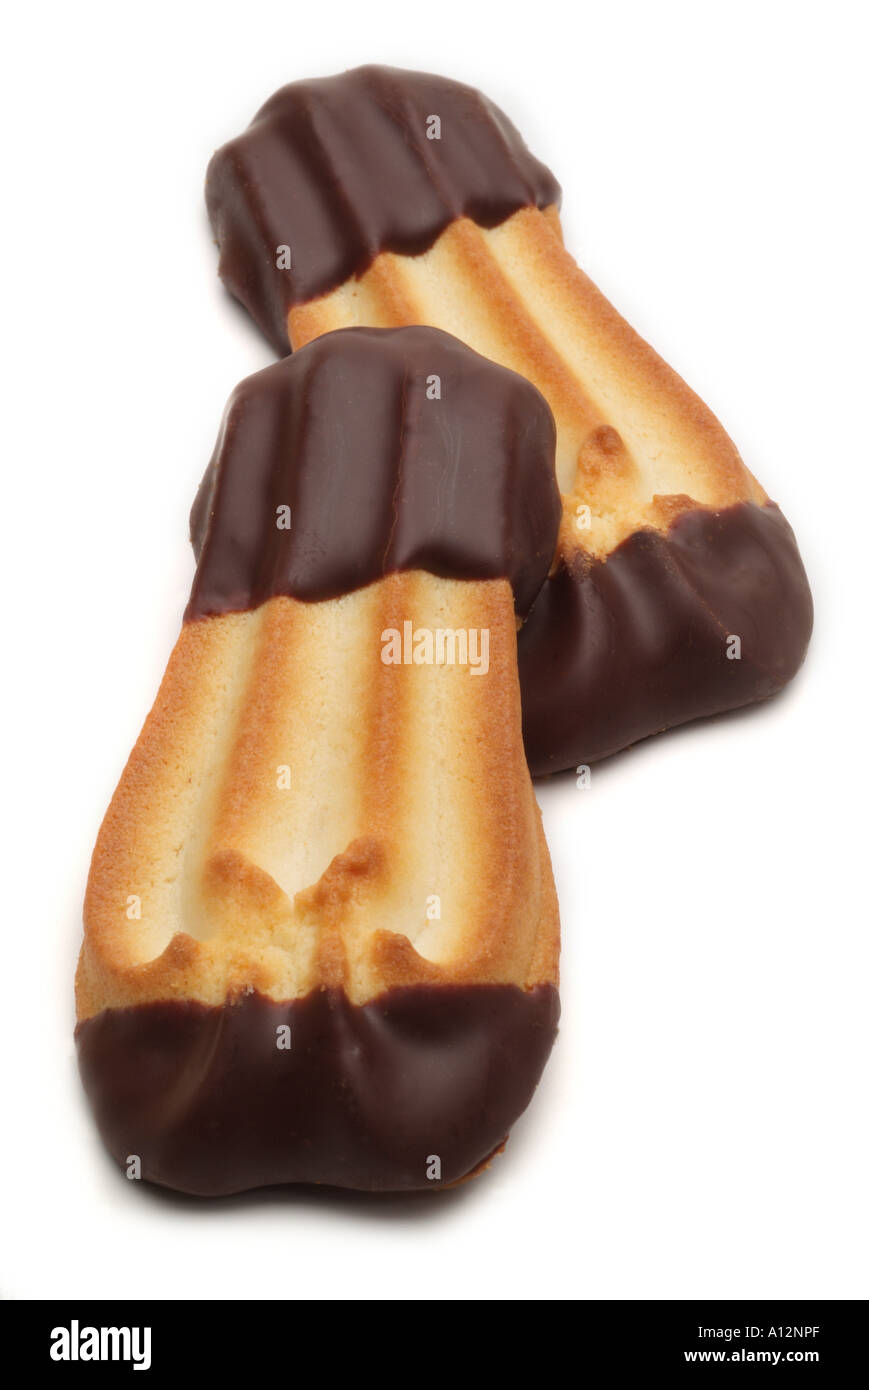 shortcake biscuit dipped in dark chocolate toasted browned pair finger Stock Photo